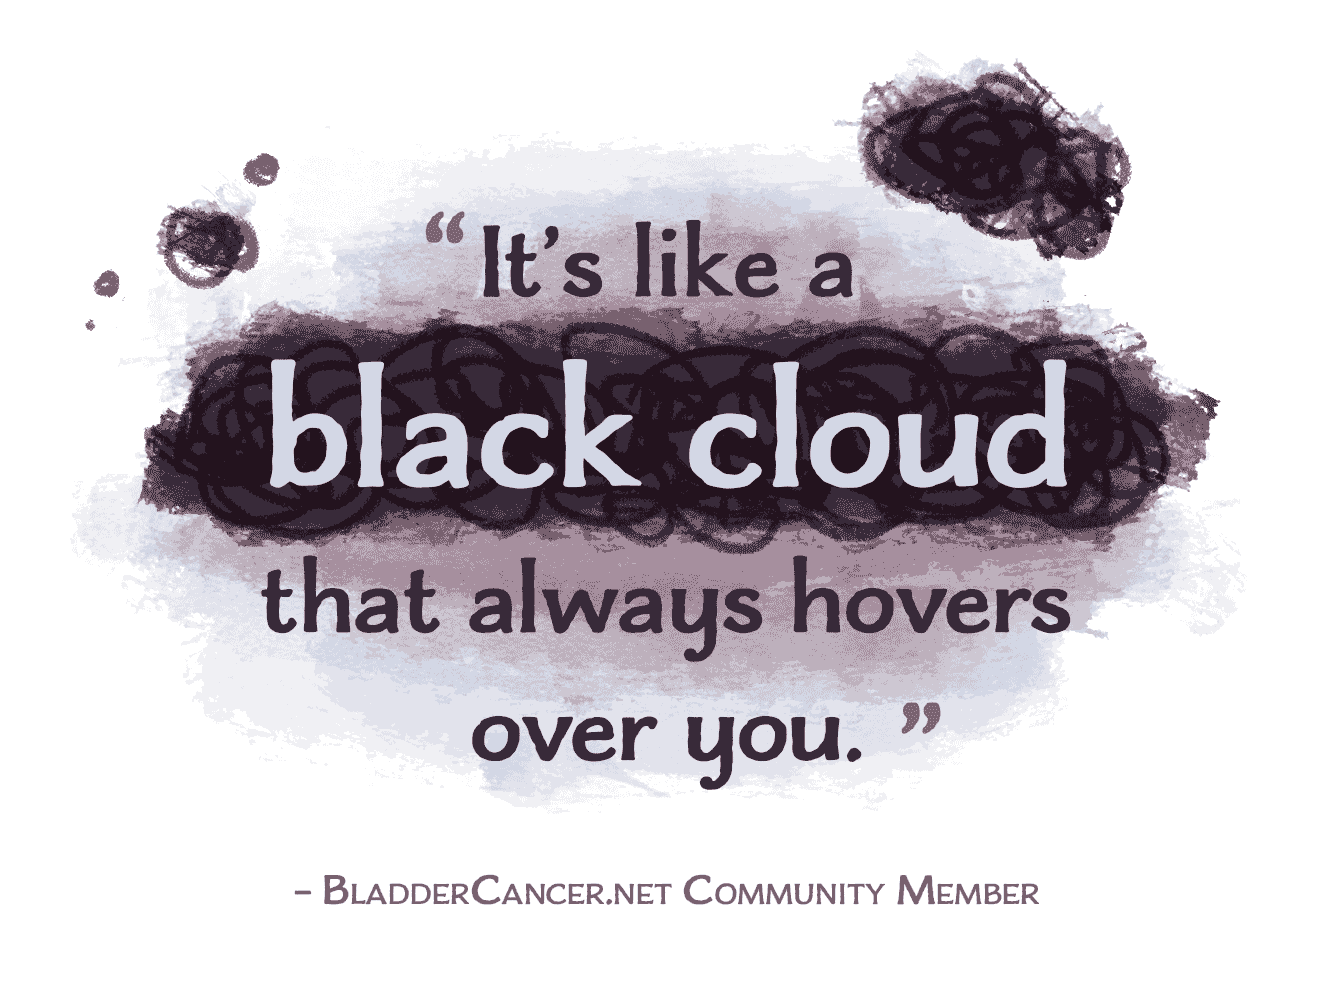 It’s like a black cloud that always hovers over you. - BladderCancer.net Community Member